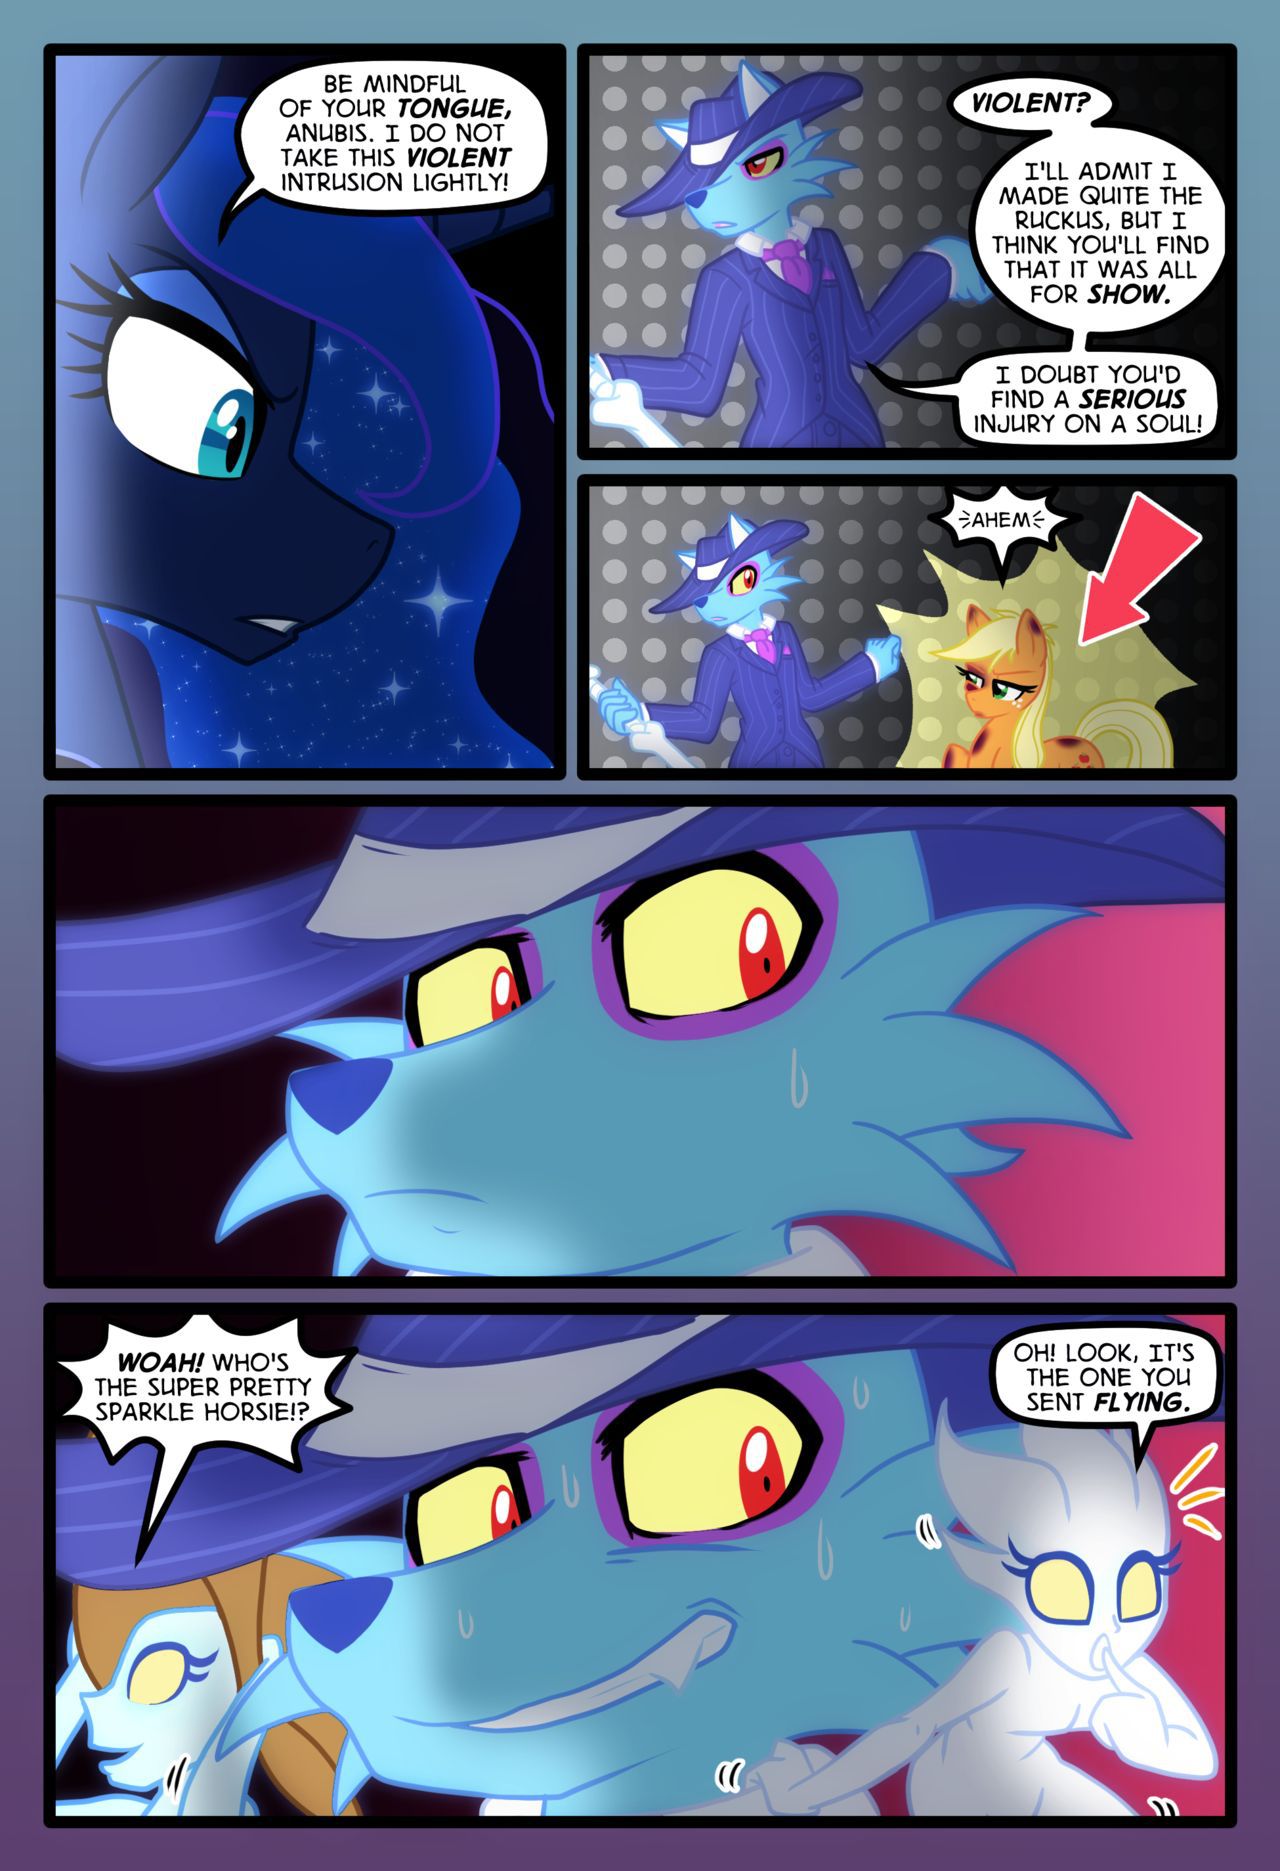 [Zaron] Lonely Hooves (My Little Pony Friendship Is Magic) [Ongoing] 172